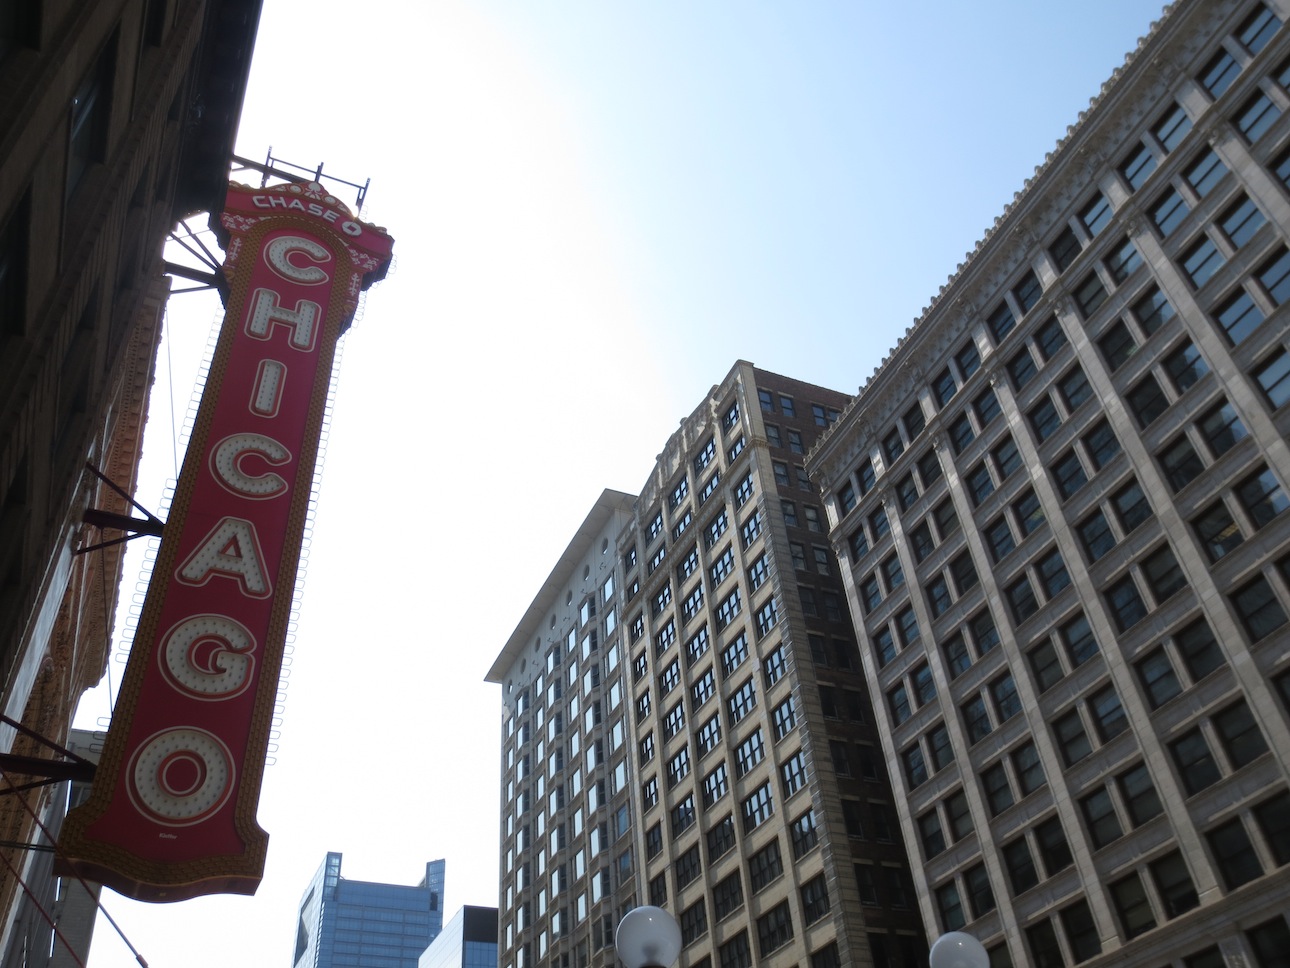 Chicago sign in South Loop area.